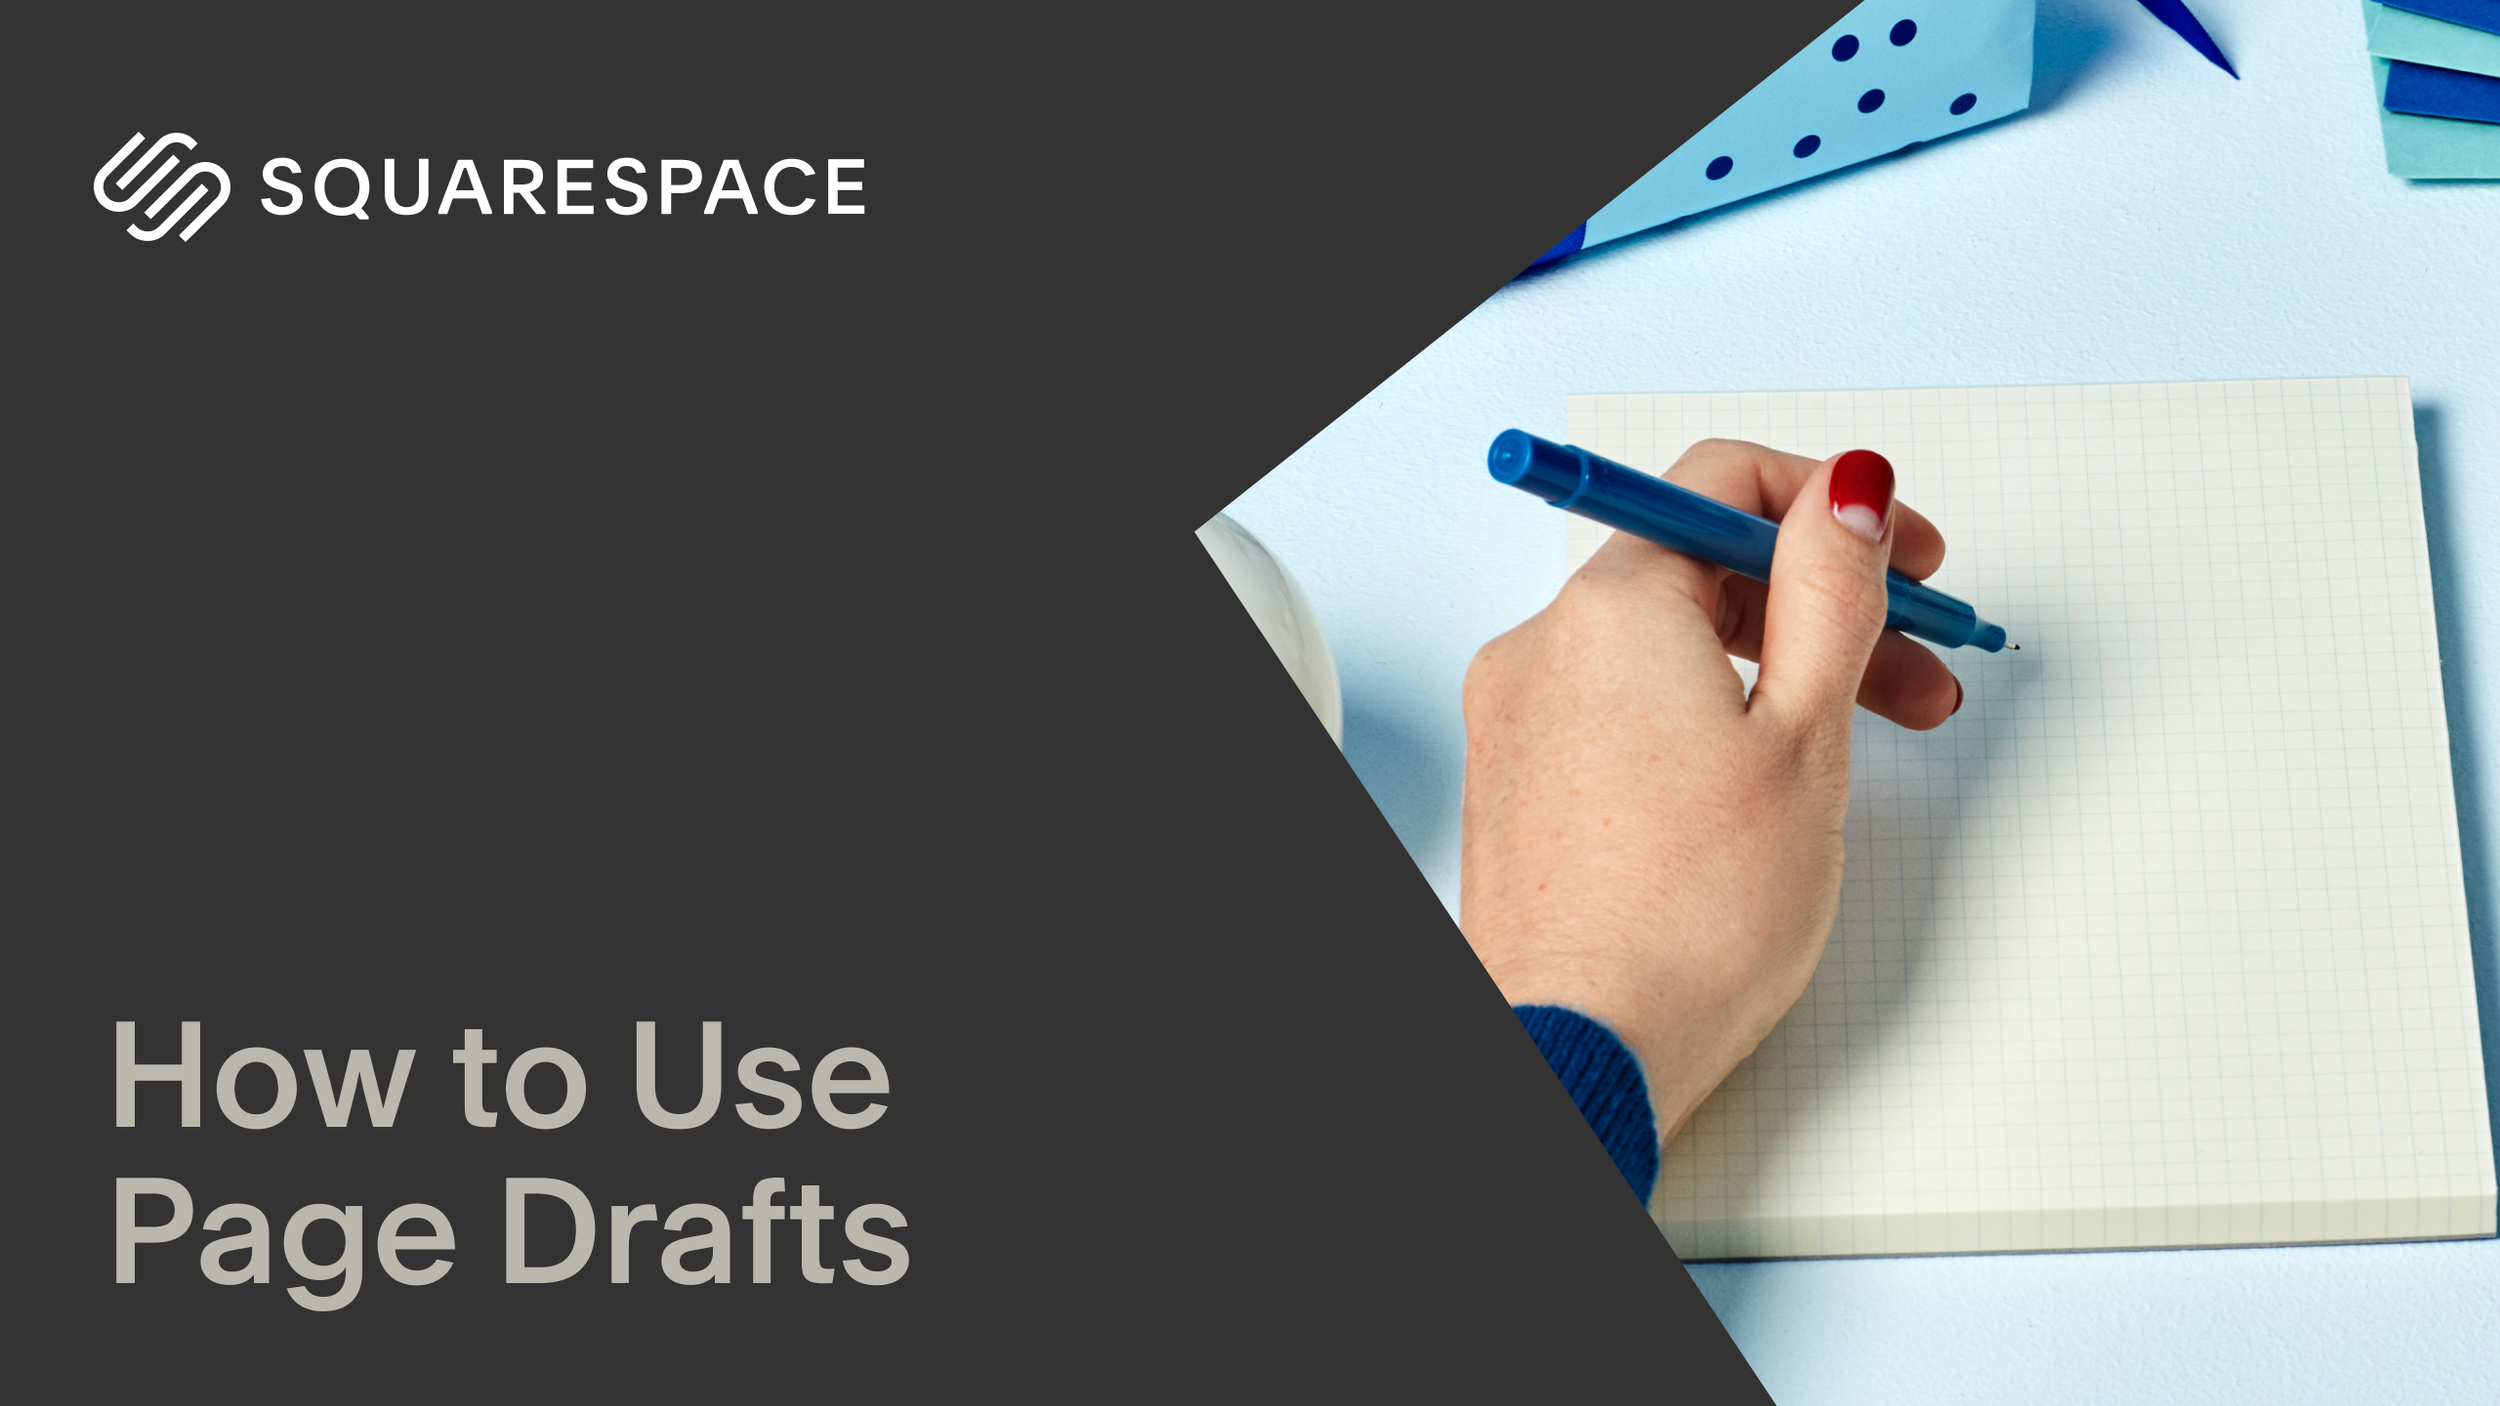 Video: How to Use Page Drafts